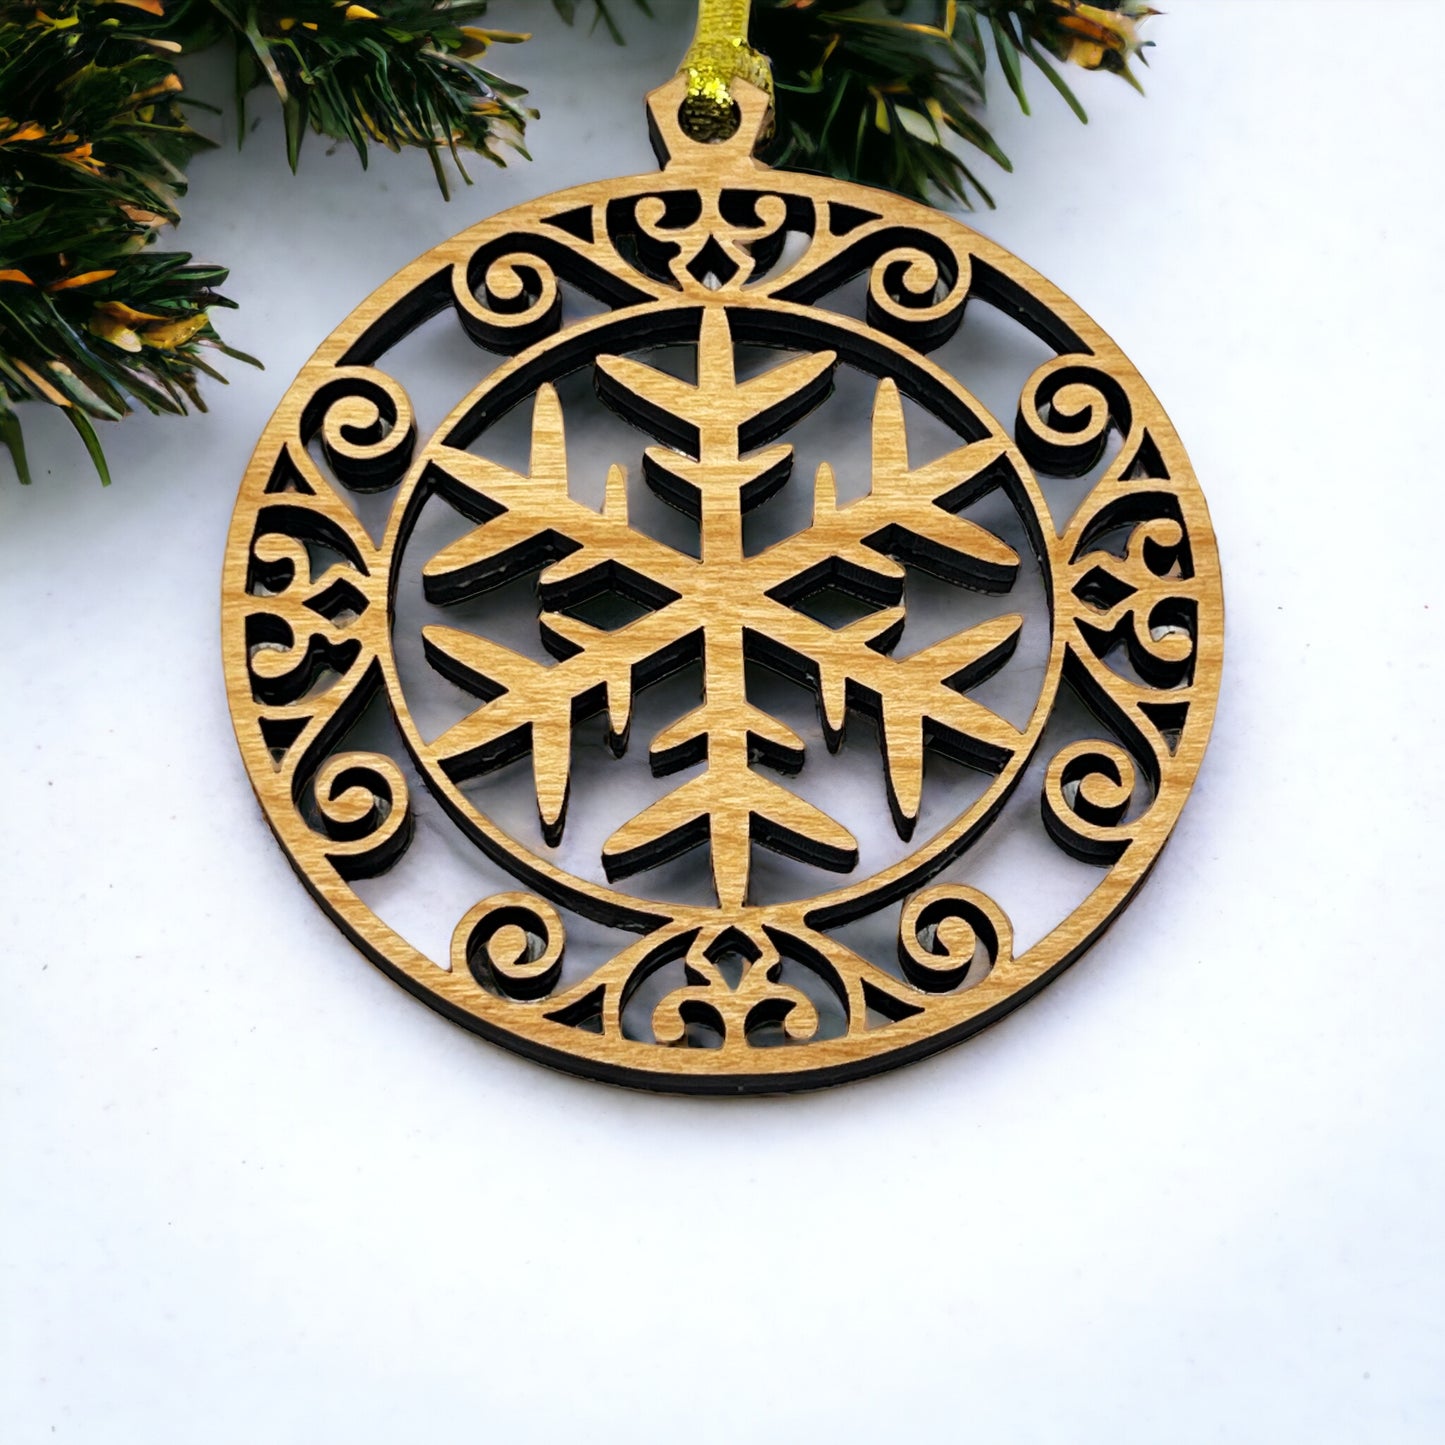 Handcrafted Wooden Snowflake Ornaments - Rustic Whimsical Holiday Decor | Charming Festive Seasonal Decorations